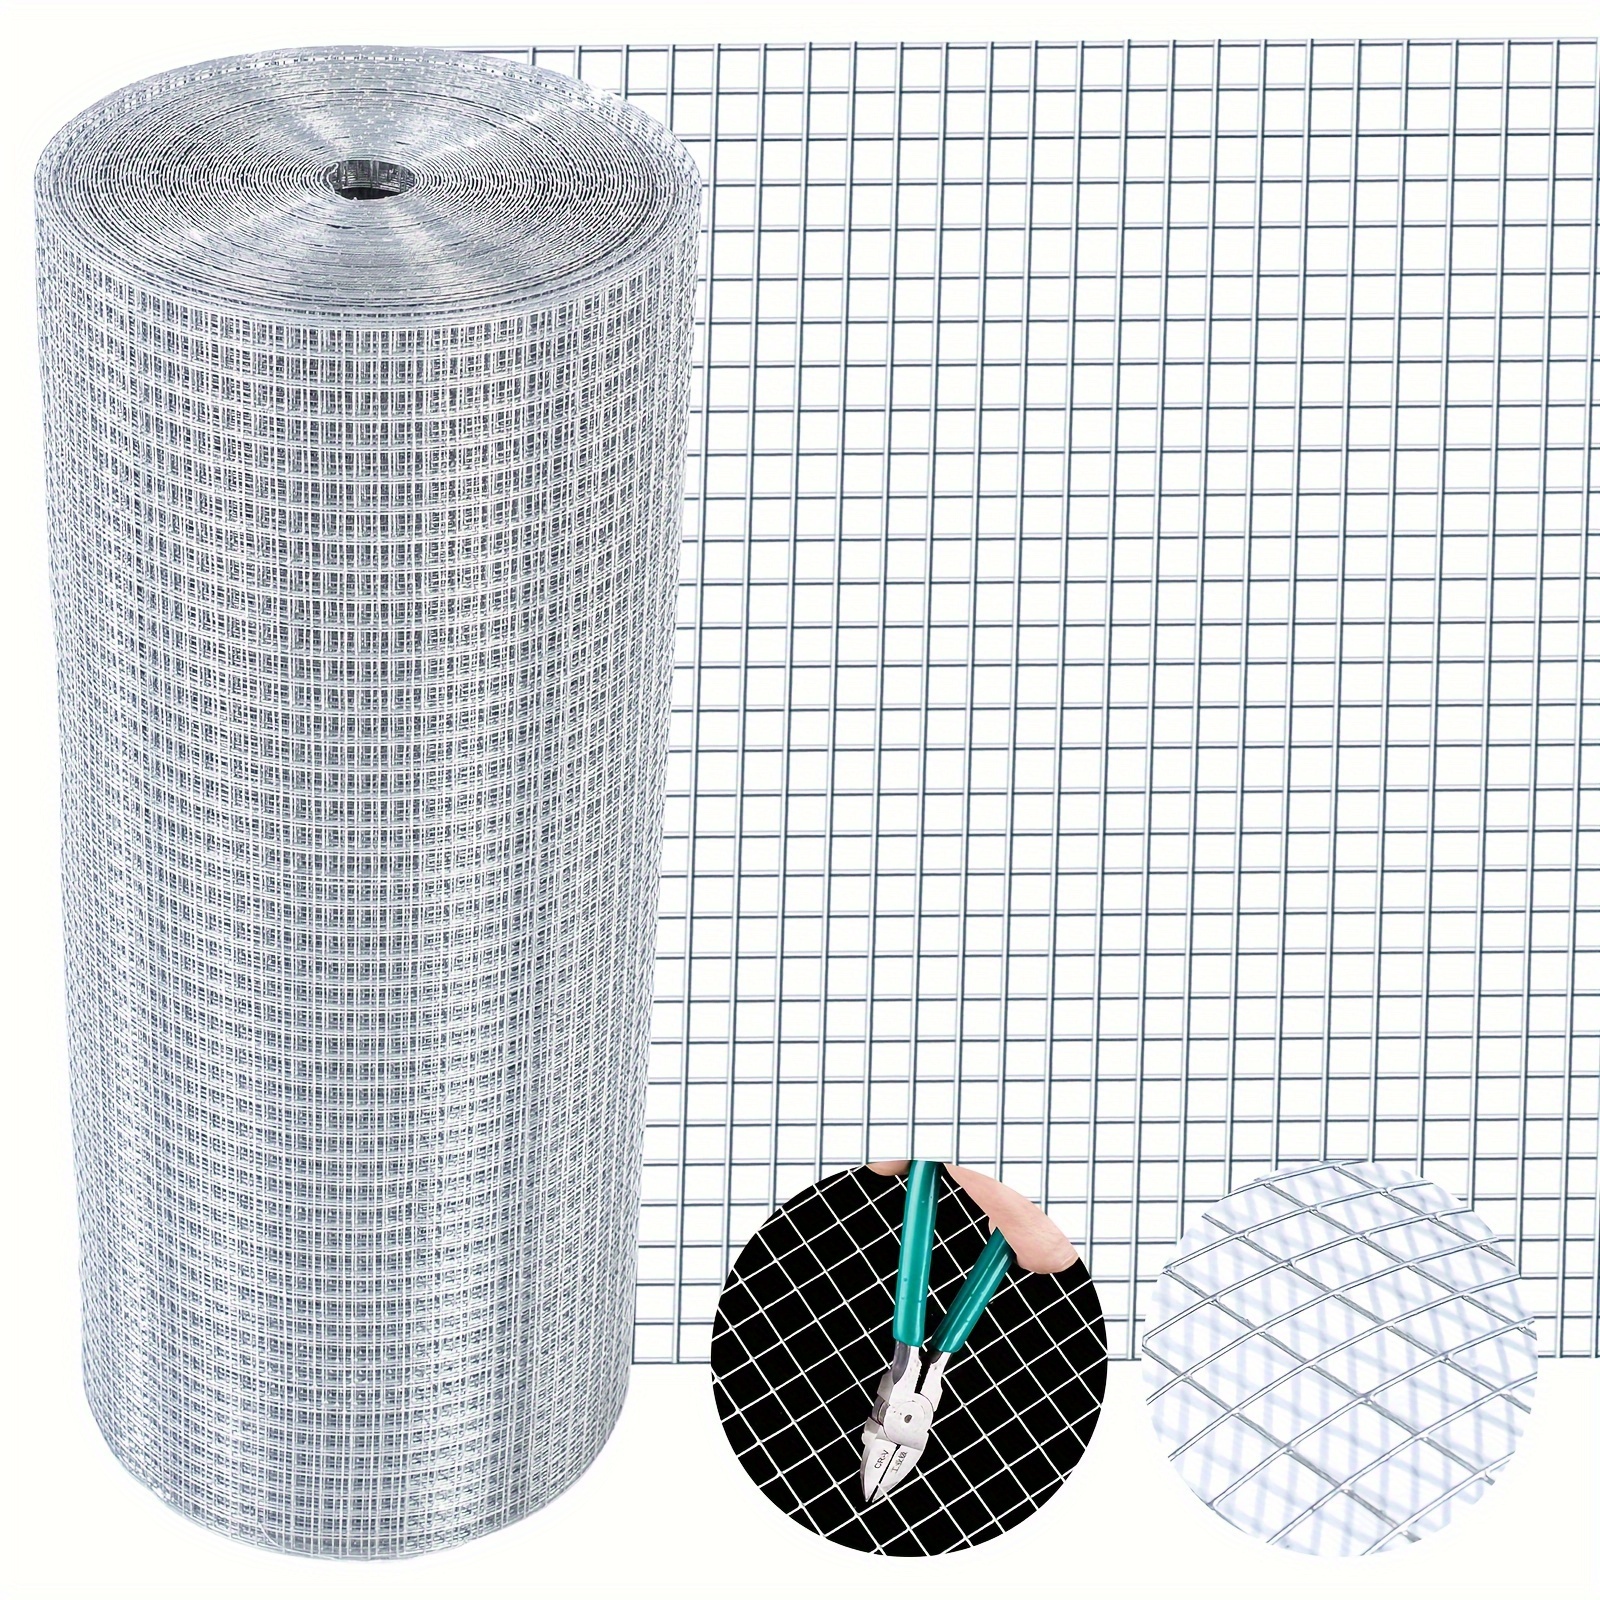 

Hardware Cloth 24 Inch X 50 Foot Welded Wire Mesh Roll - Hot-dip Galvanized For Chicken Wire Fencing, Garden Fence, And Rabbit Hutch Enclosures